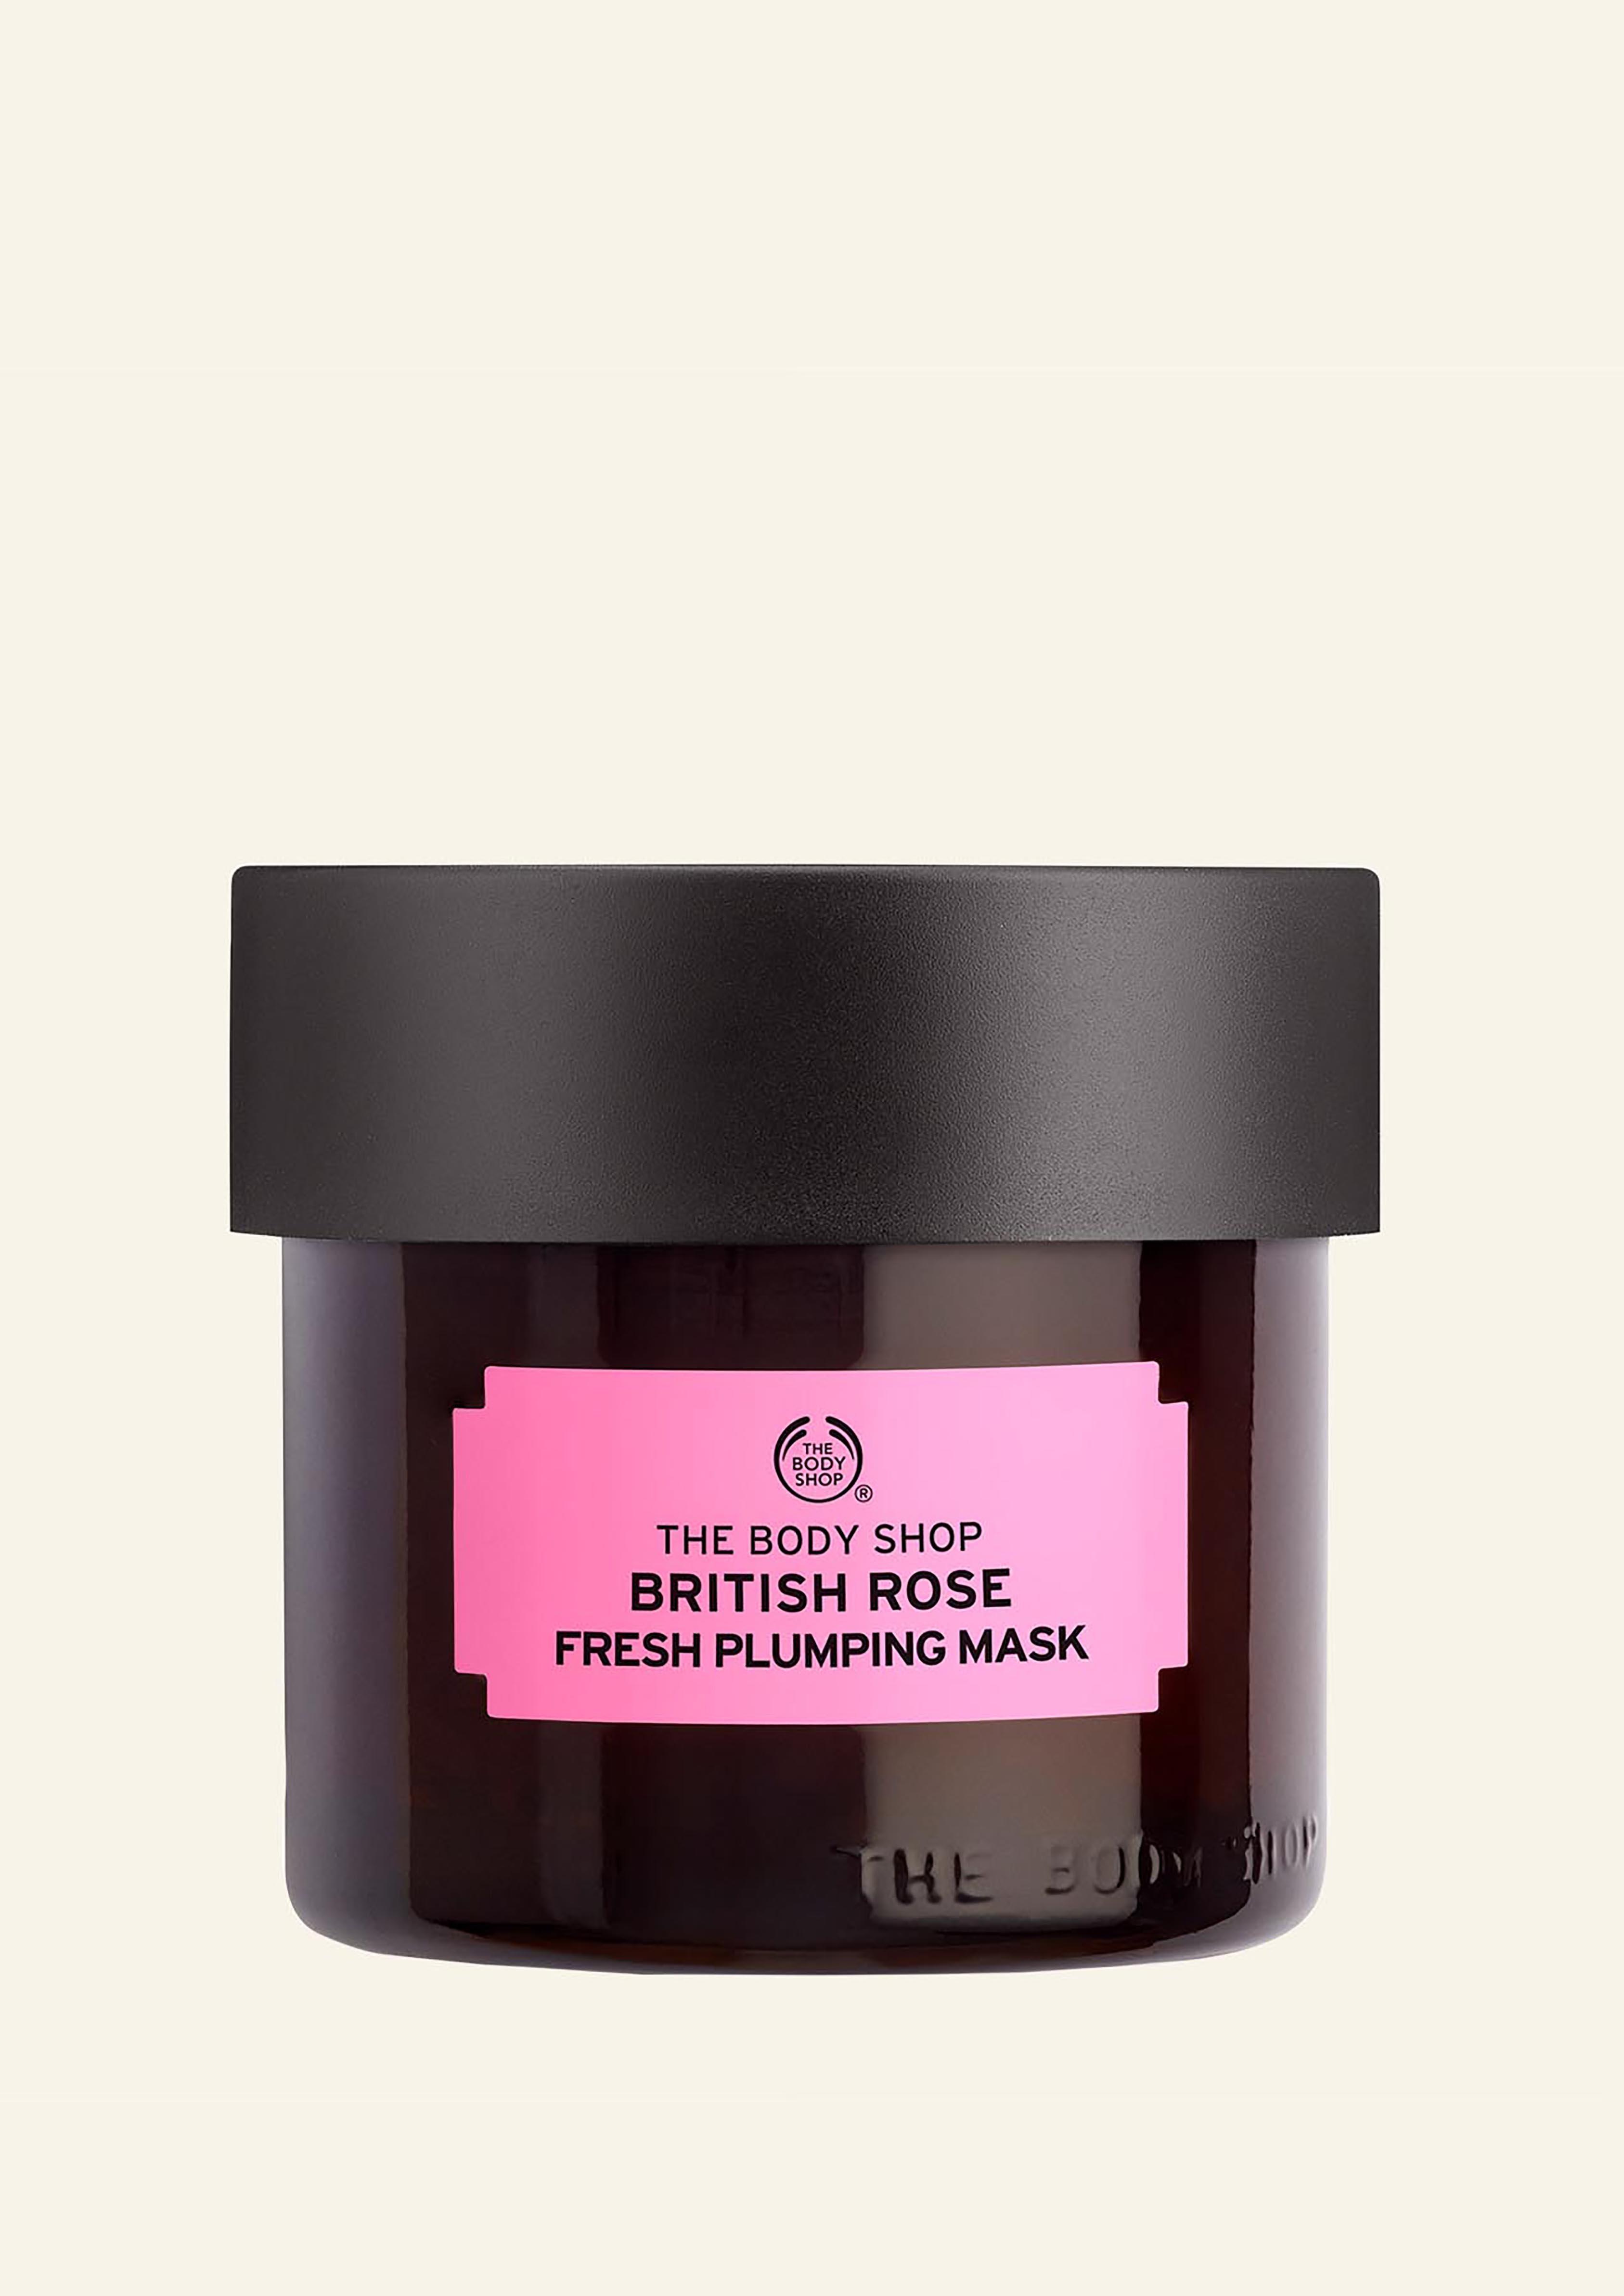 THE BODY SHOP BRITISH ROSE BODY CARE COLLECTION - Beautygeeks